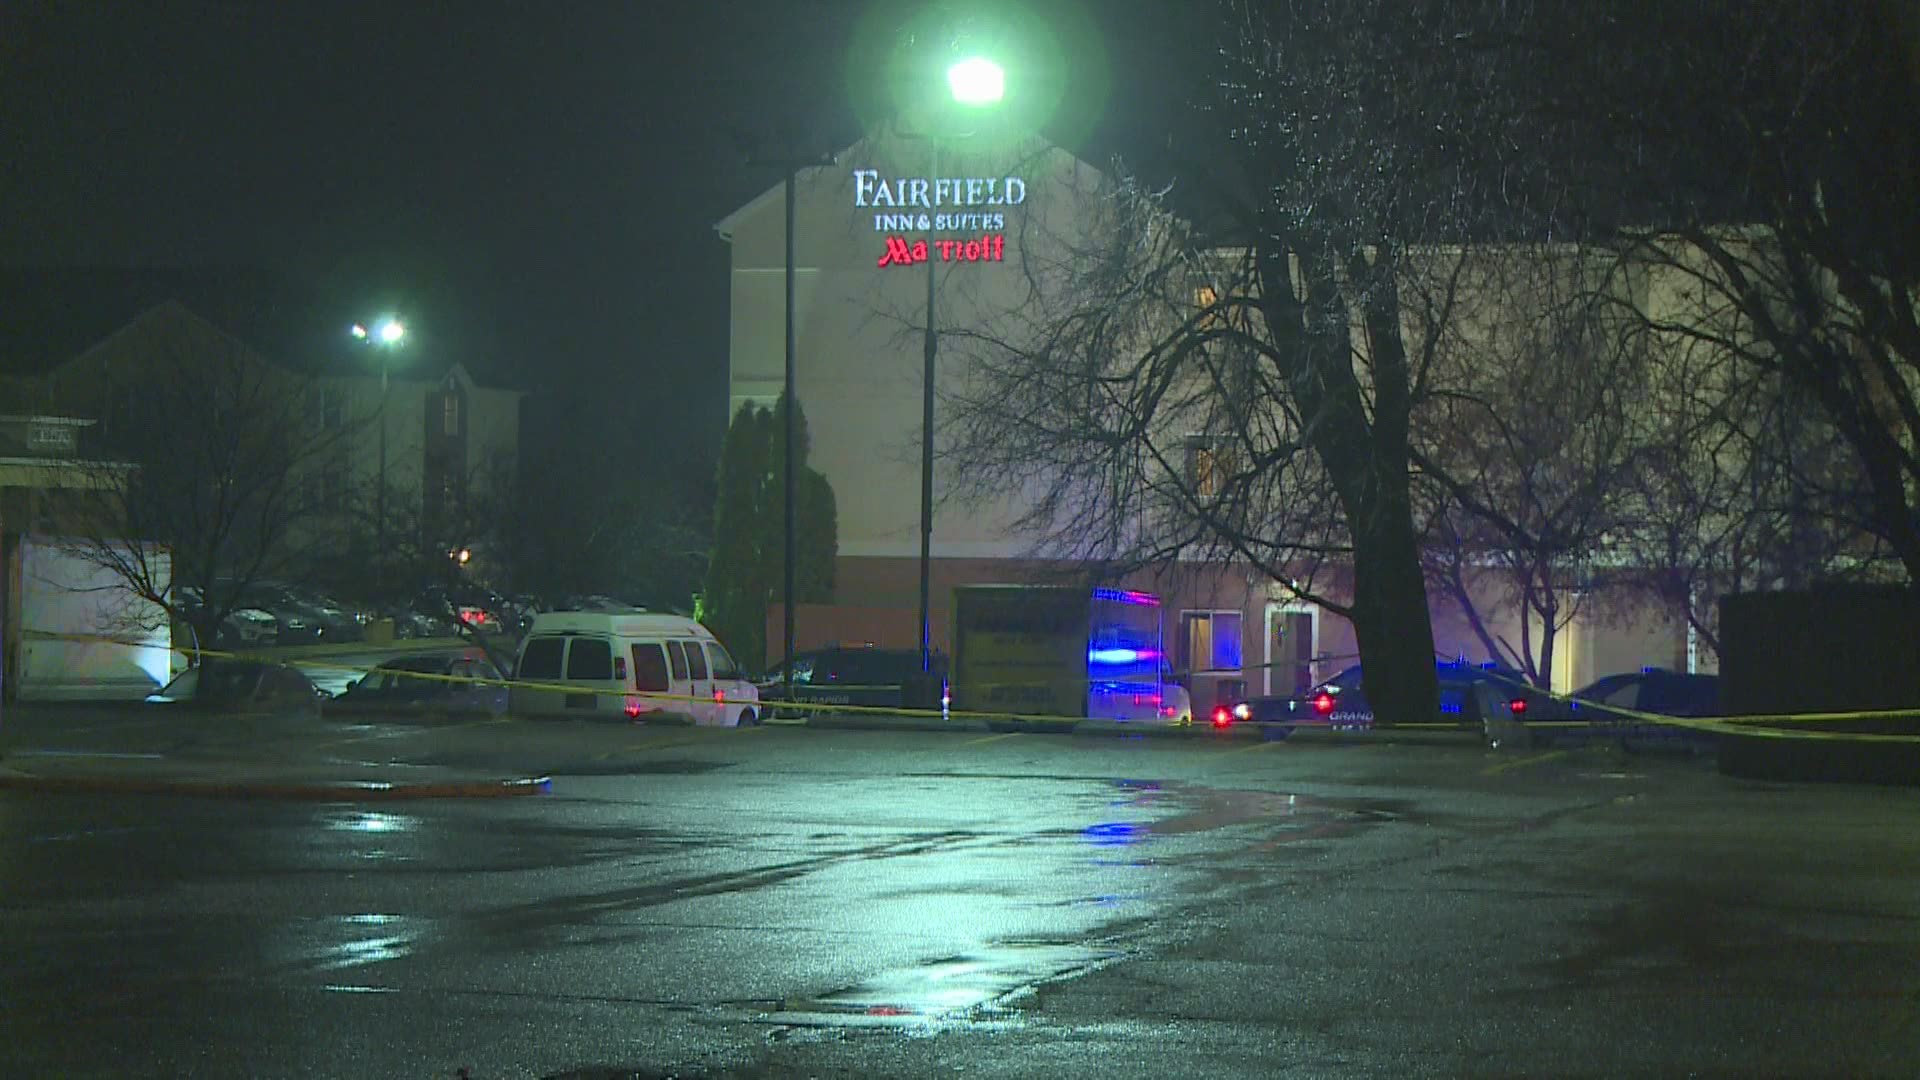 Grand Rapids police are investigating a shooting that sent two people to the hospital early this morning.